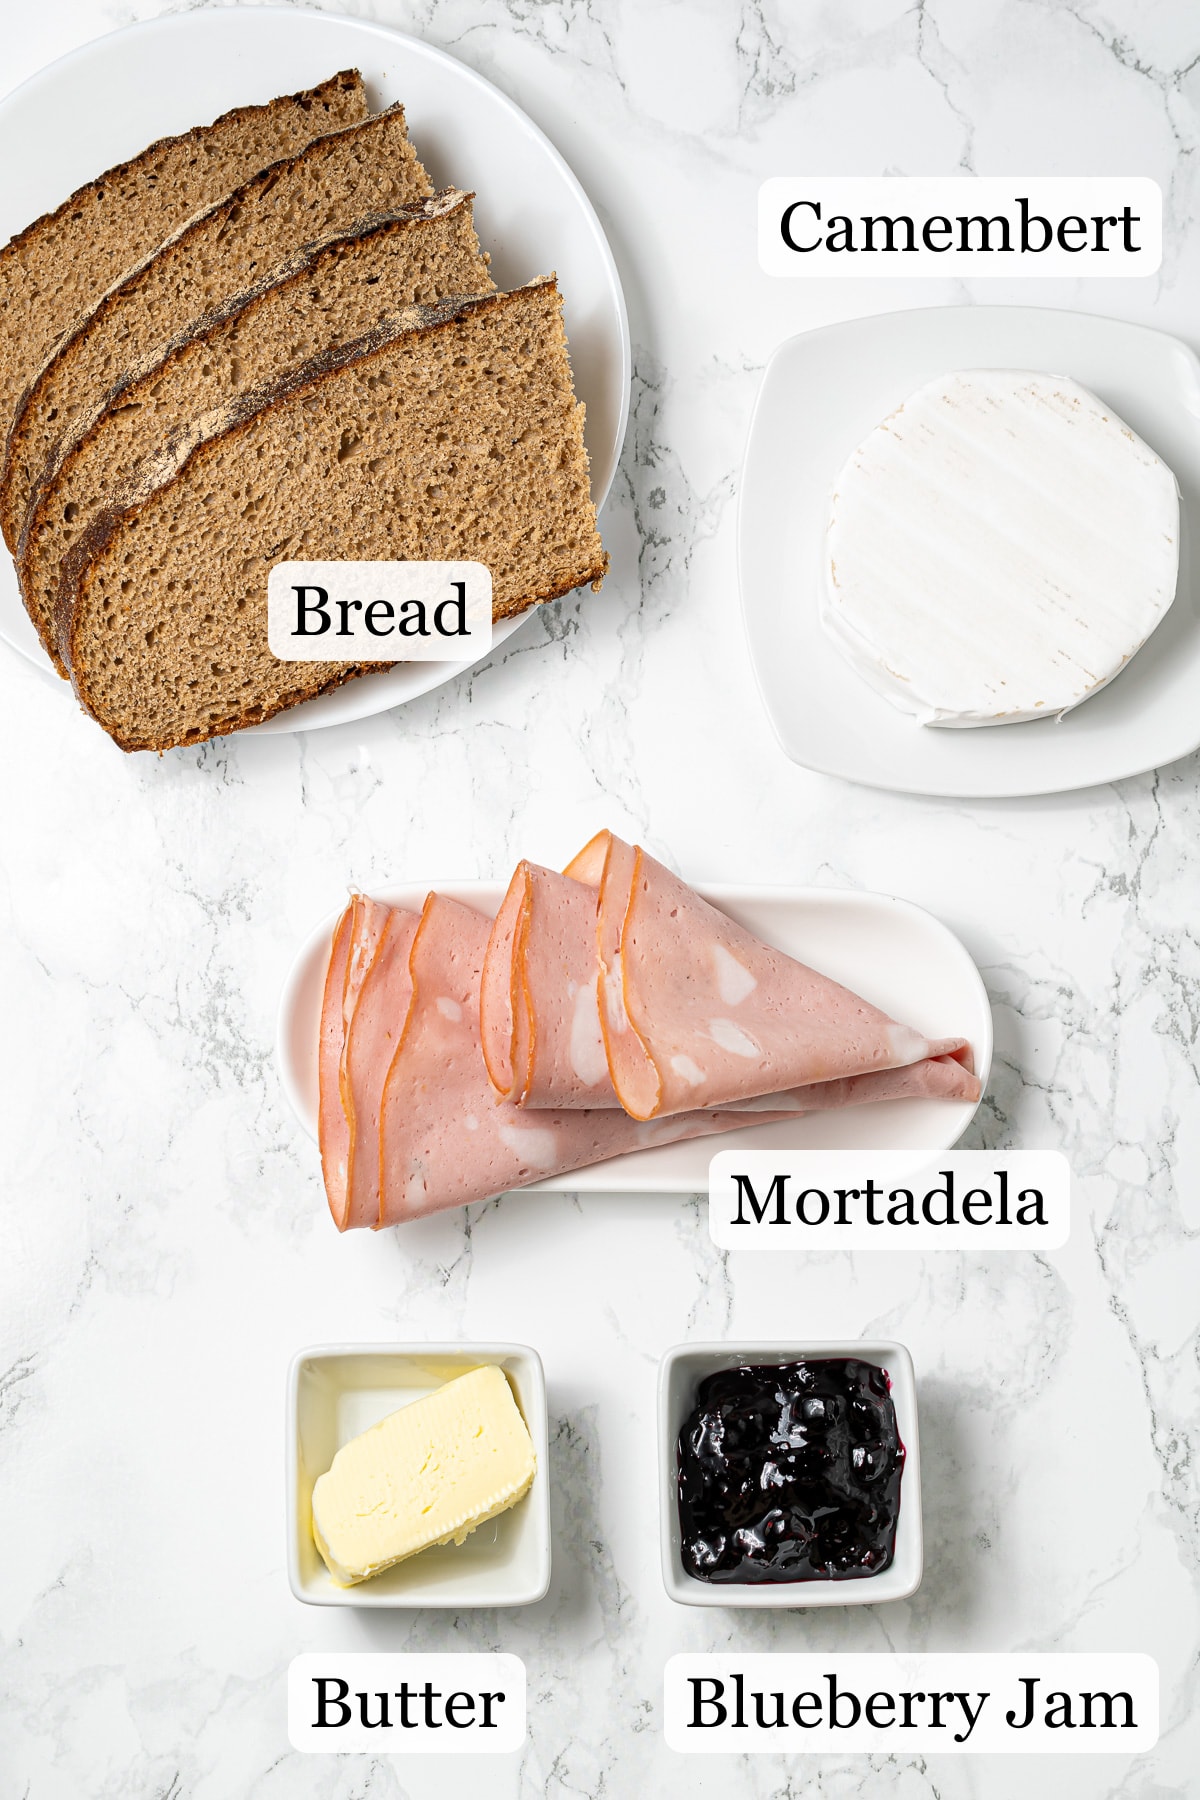 Brown bread slices, soft cheese, mortadella, butter, blackcurrant jam on marble counter.